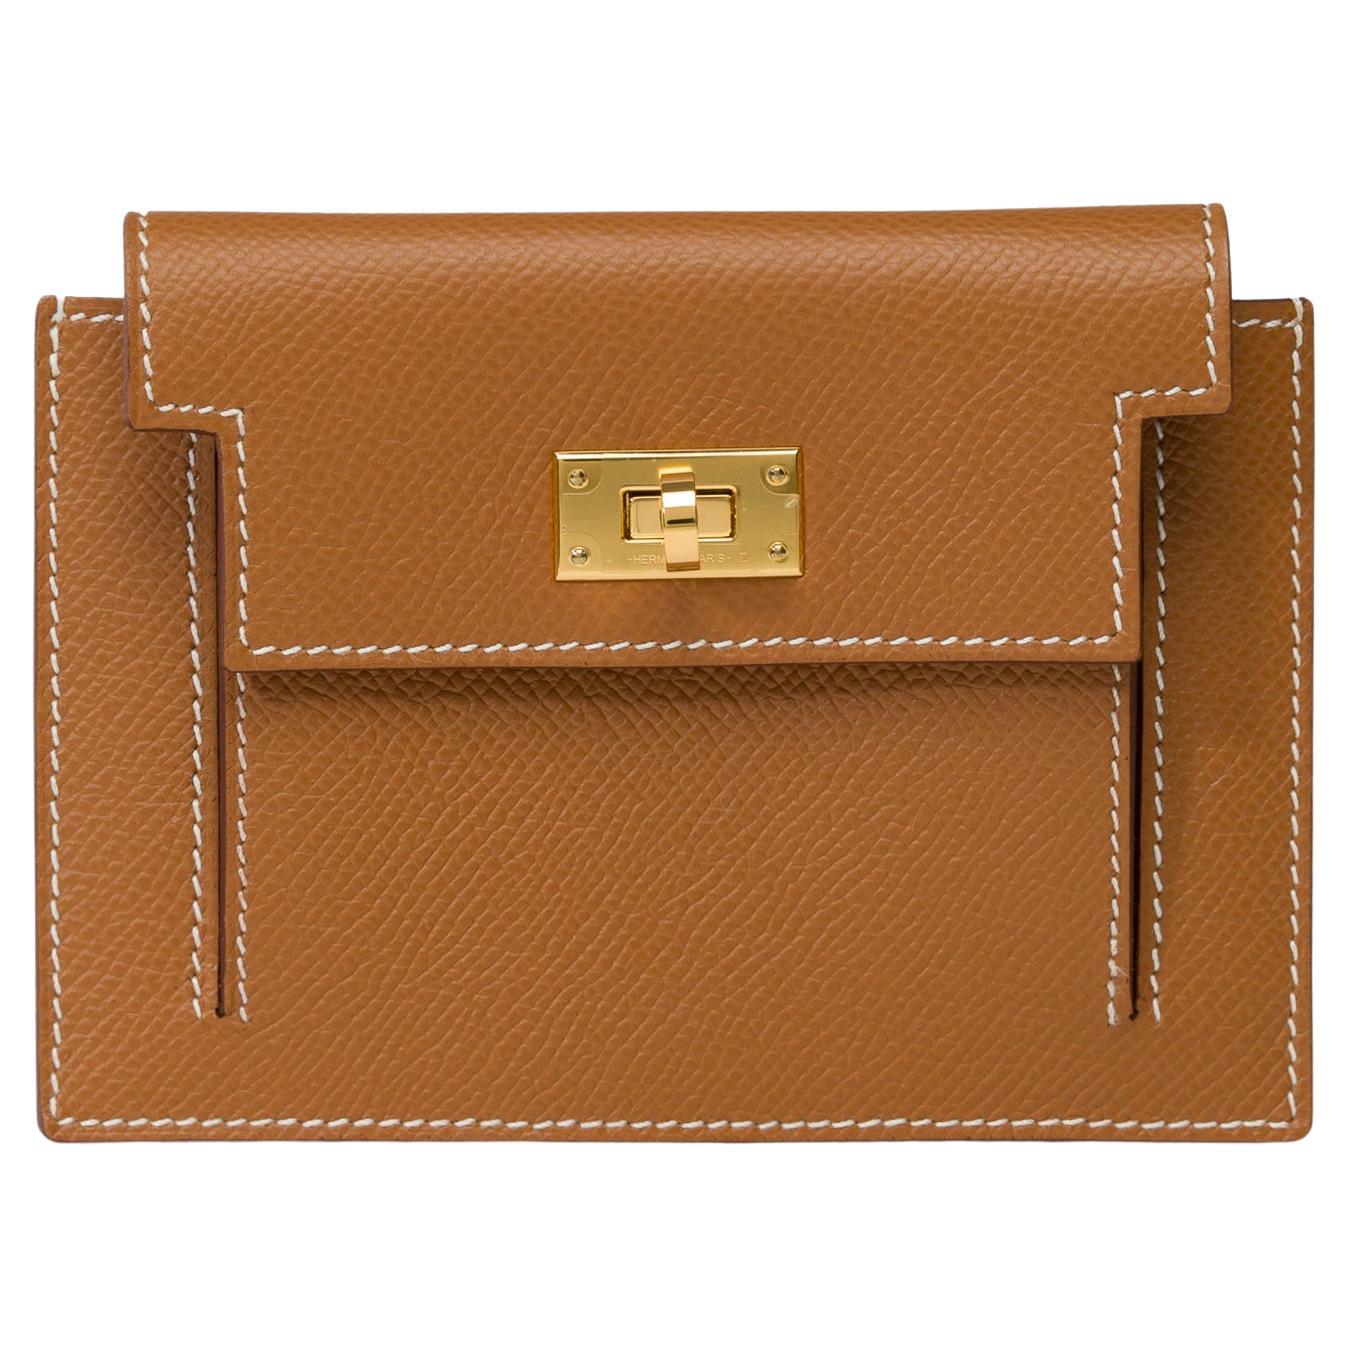 Beautiful New Hermès Kelly Pocket Compact in Gold Epsom calf leather , GHW For Sale